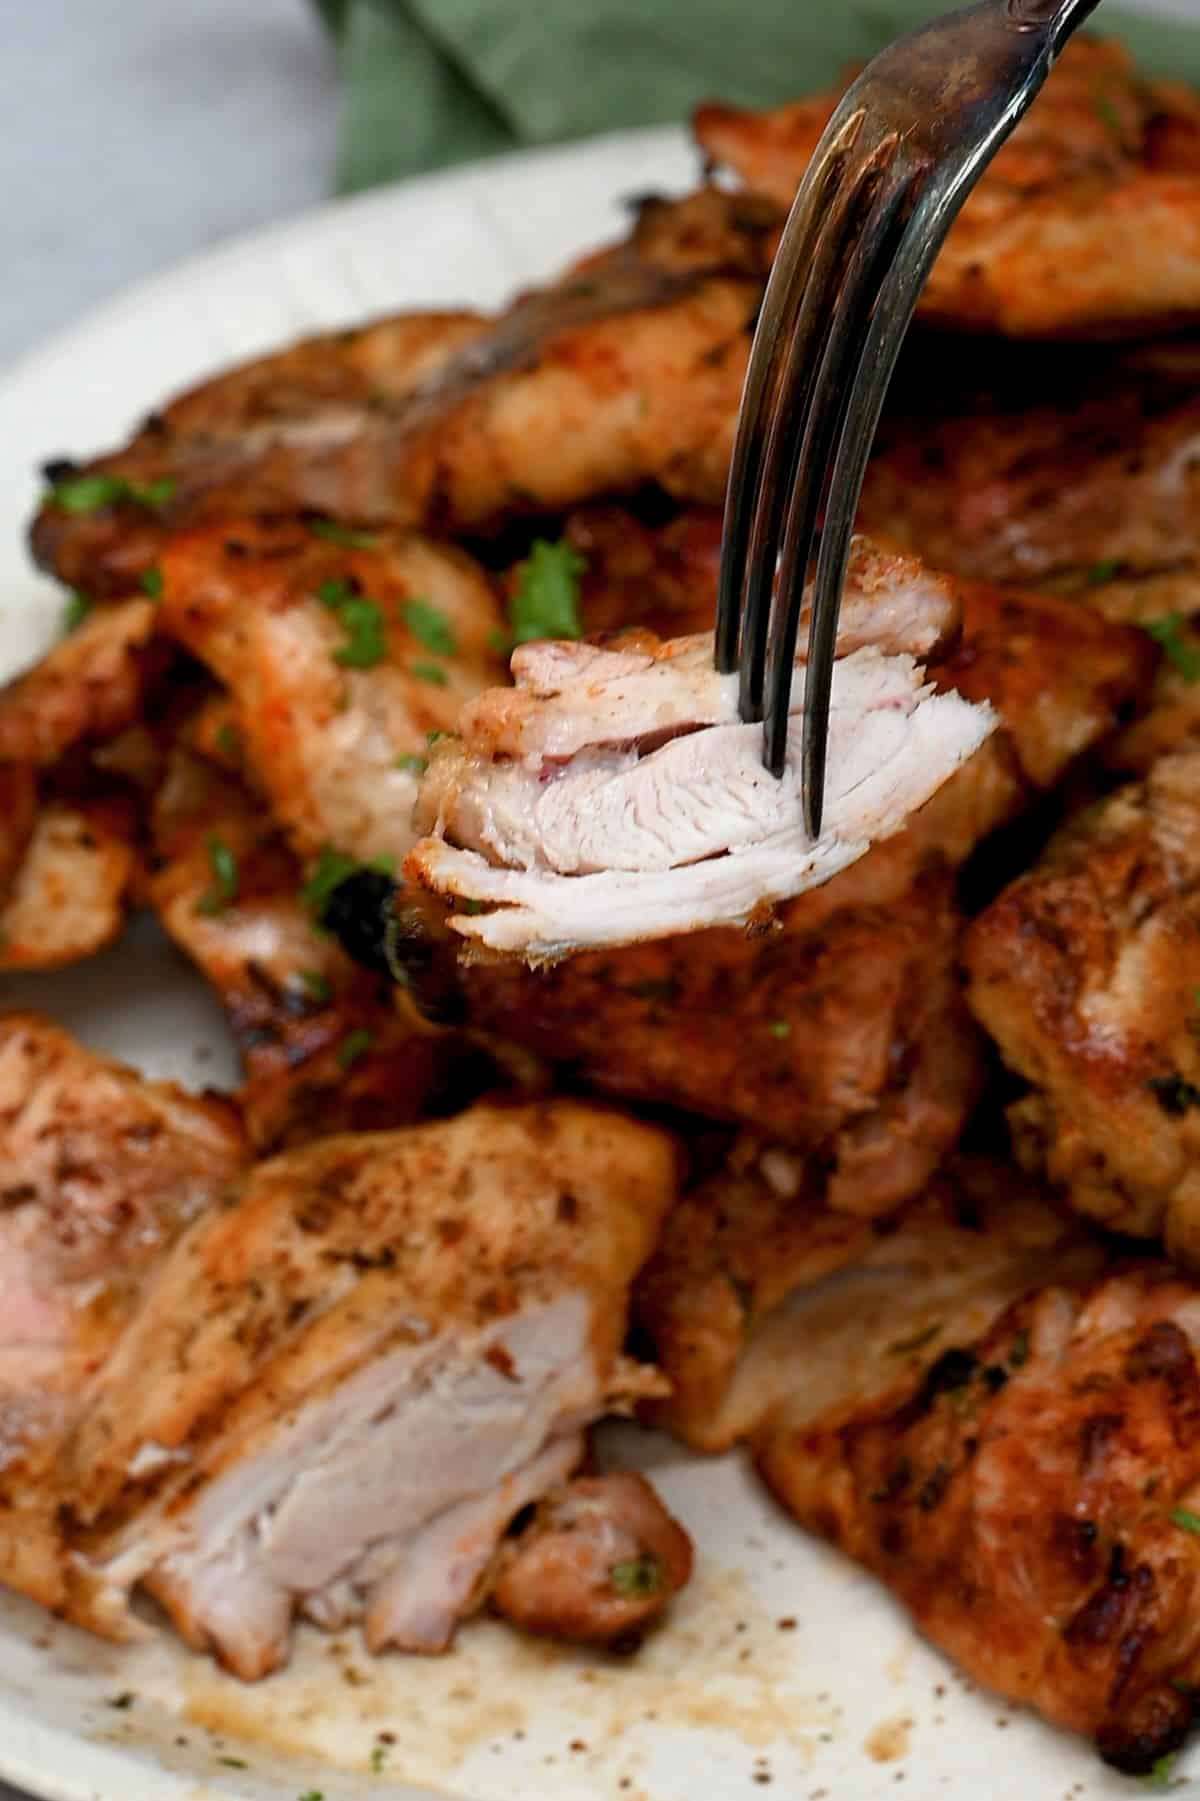 A forkful of grilled chicken thighs